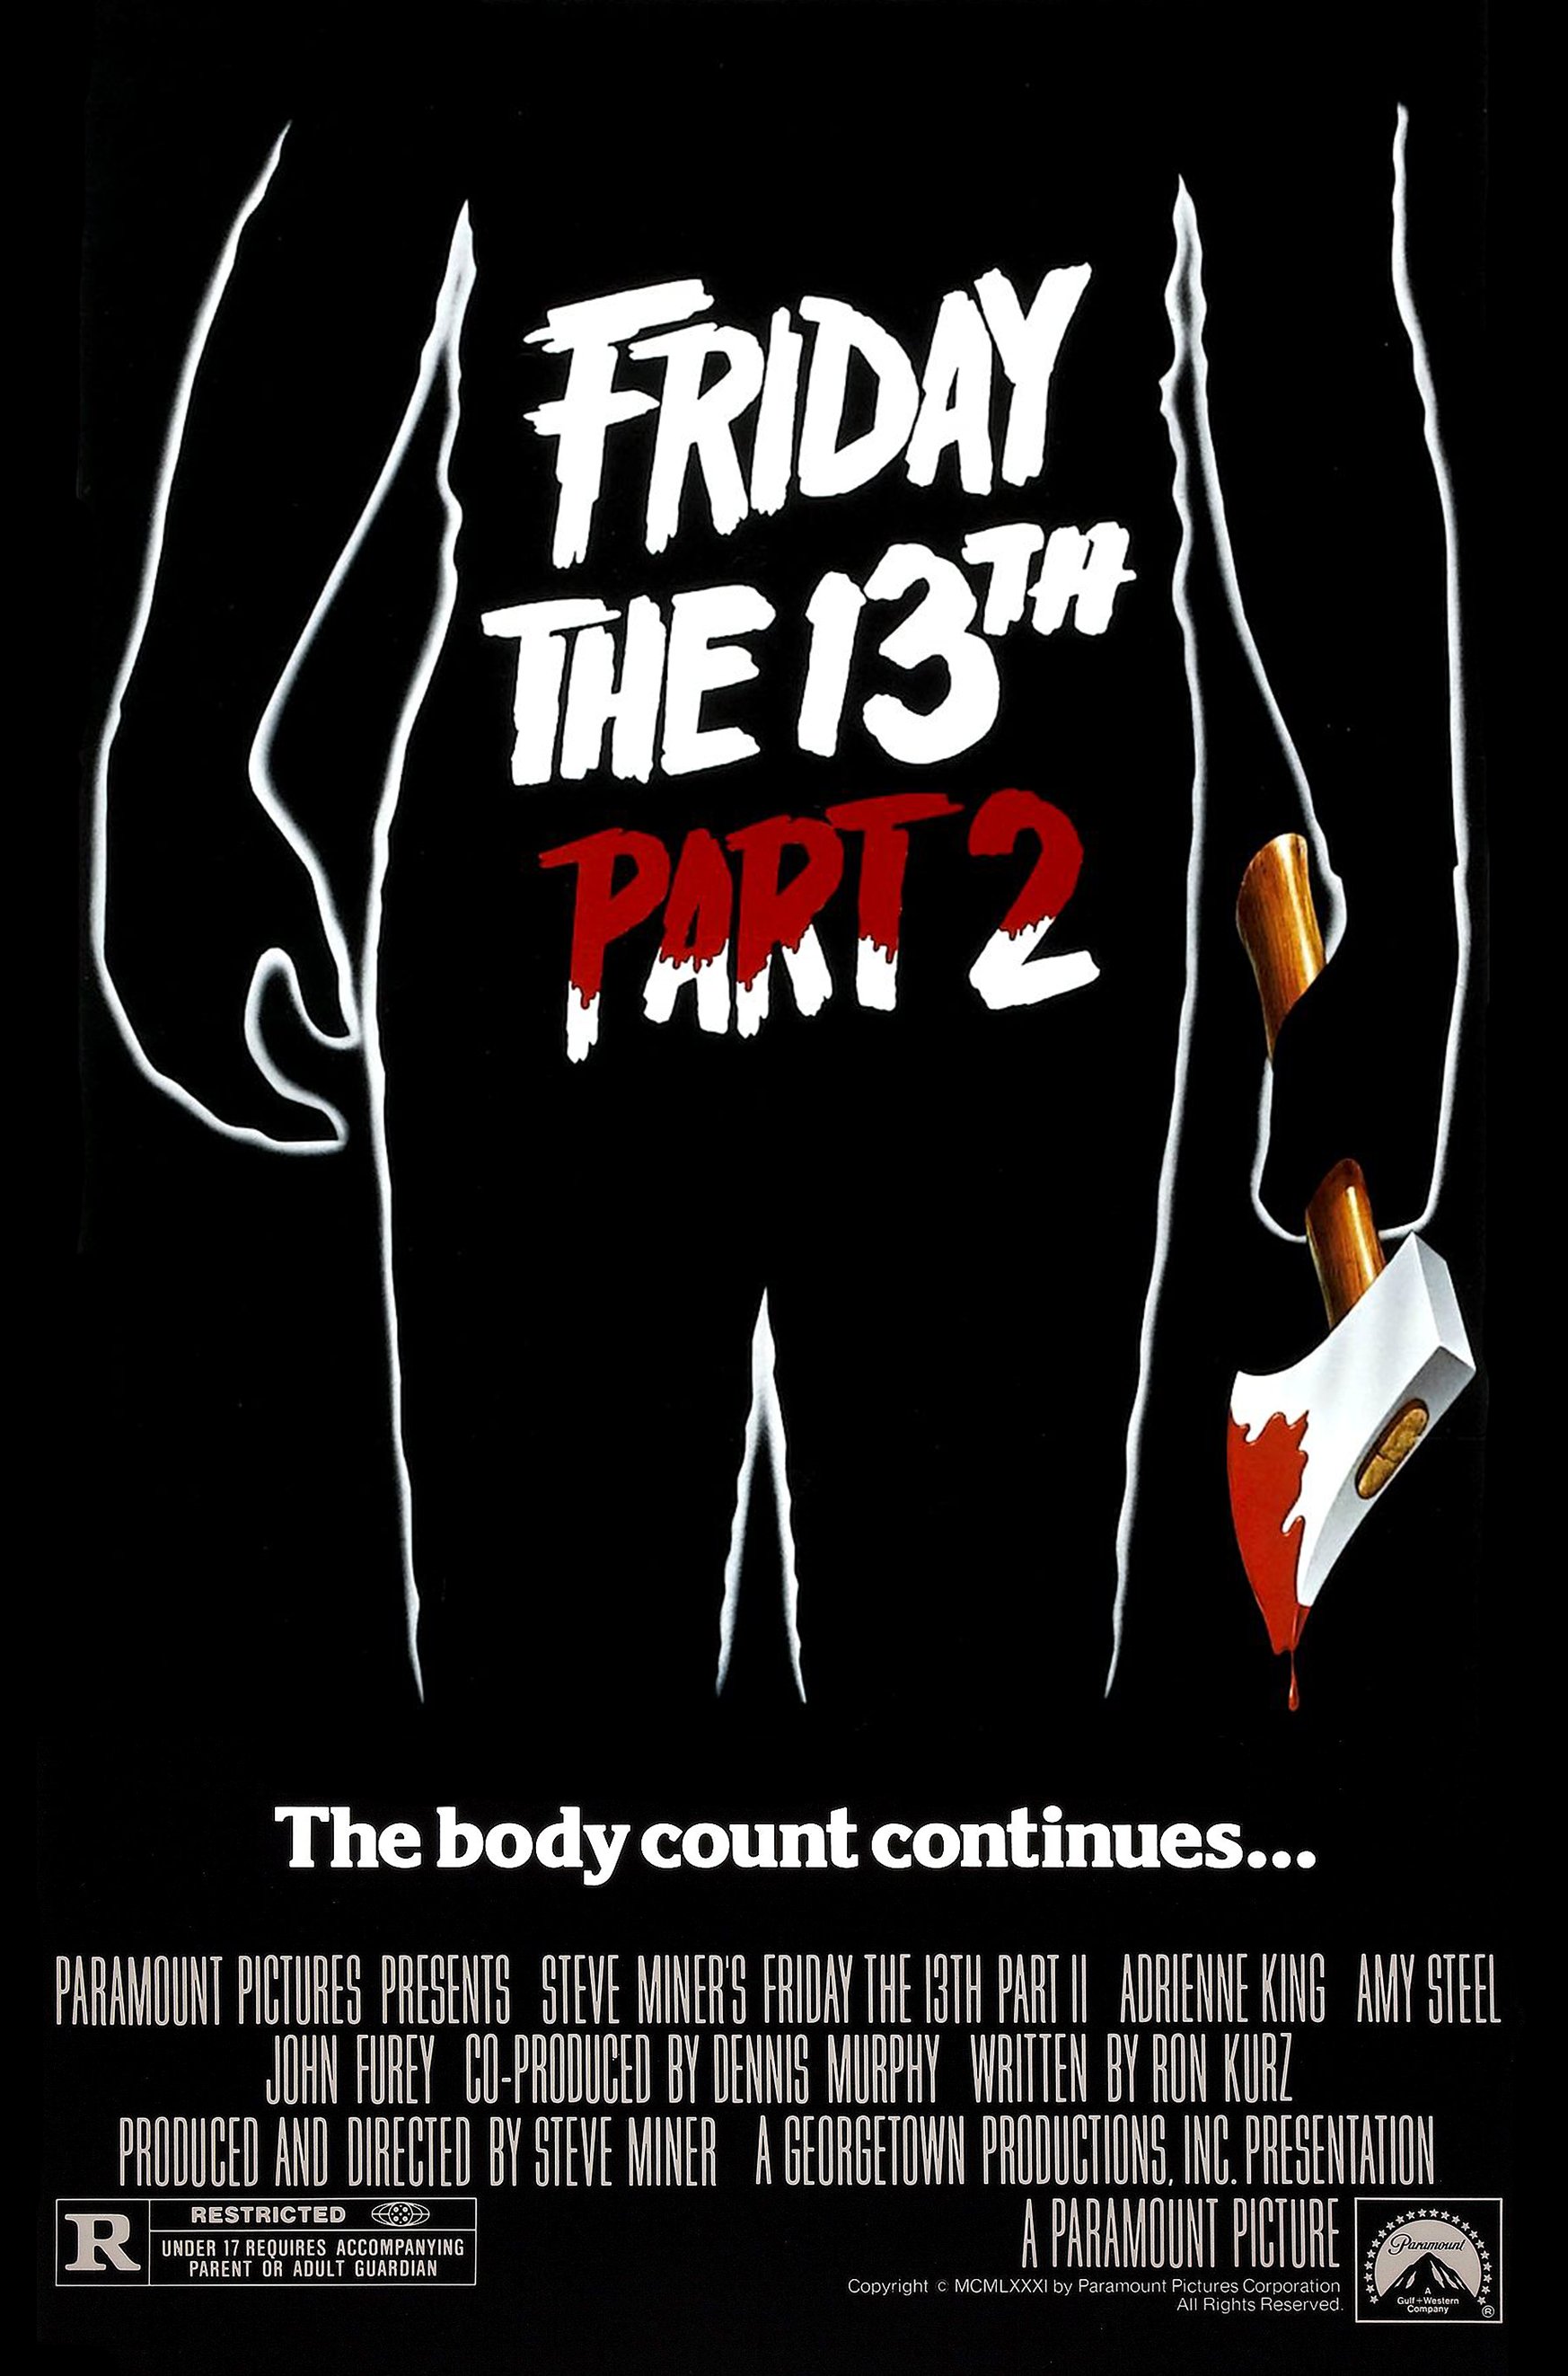 Friday the 13th Pt 2